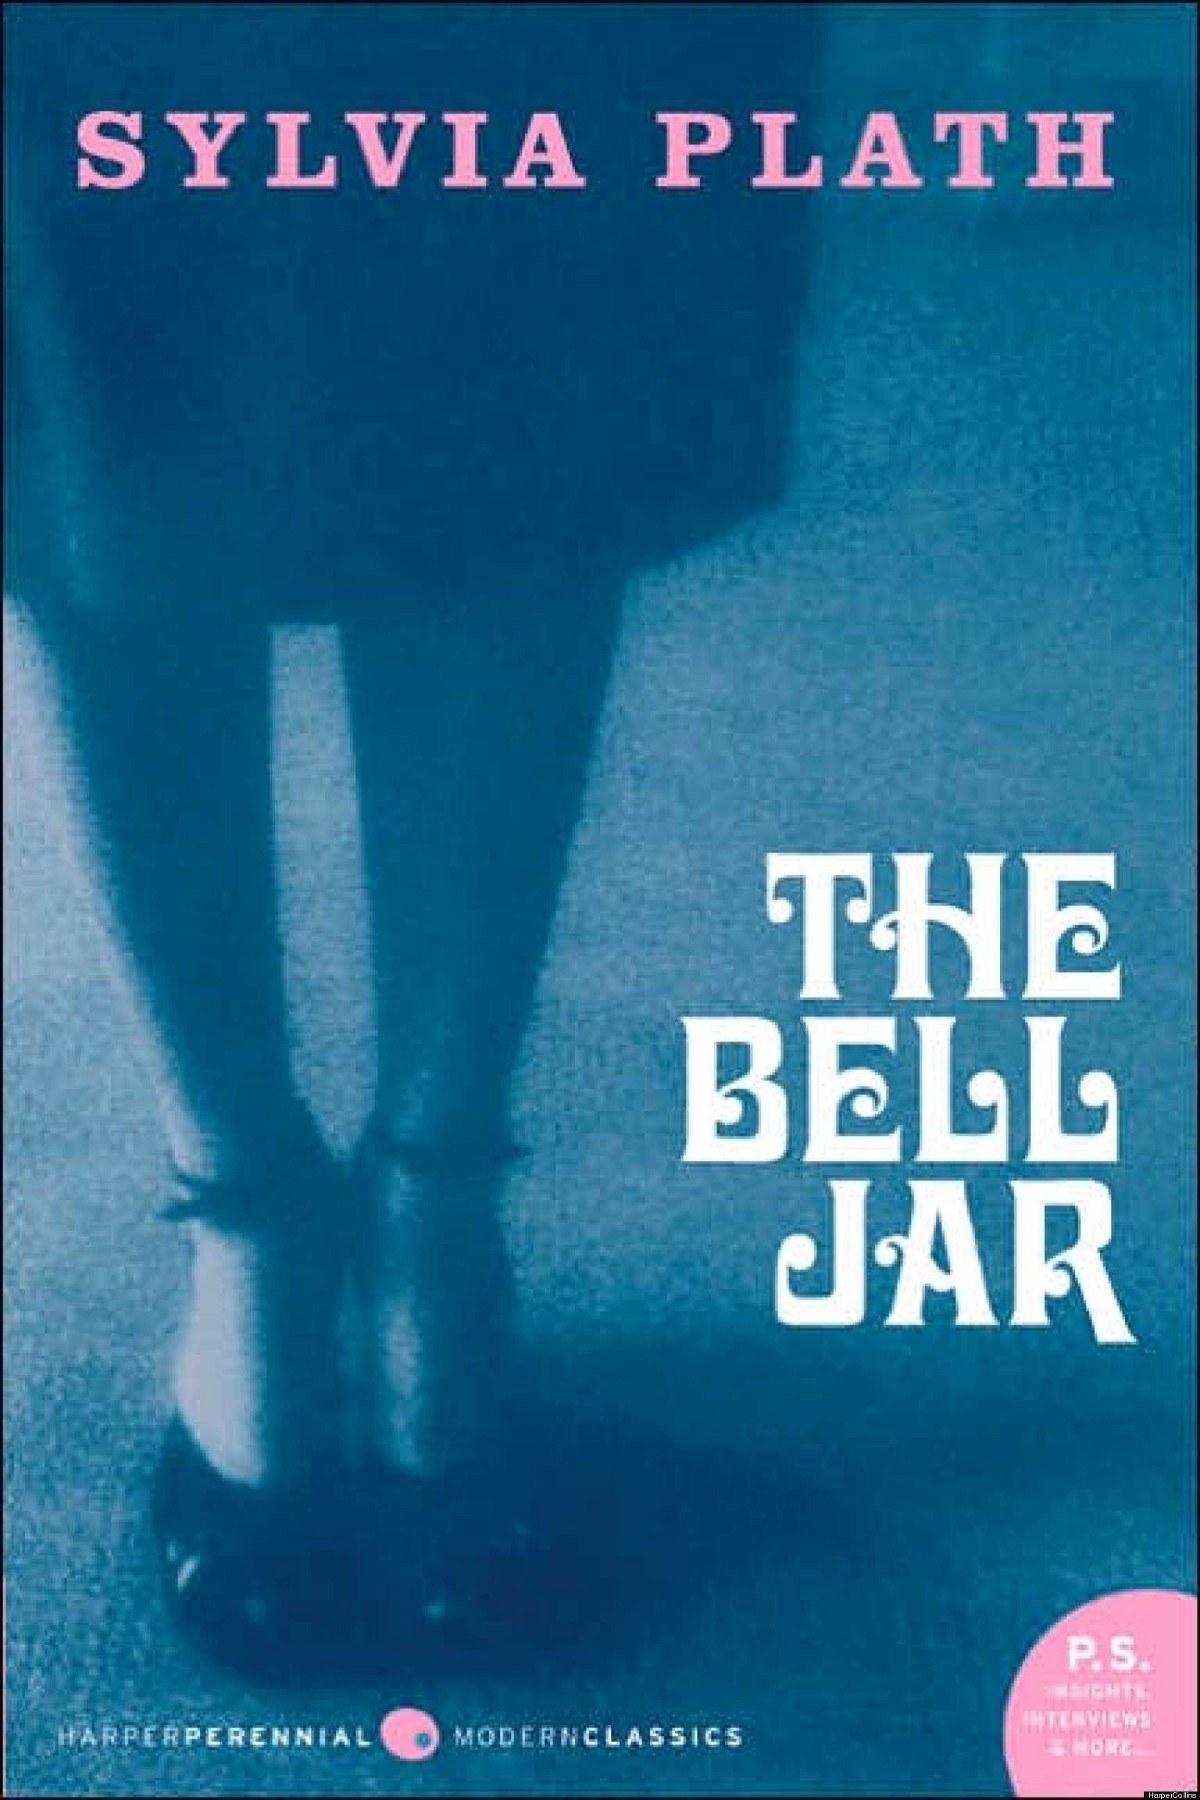 &quot;The Bell Jar&quot; by Slyvia Plath.